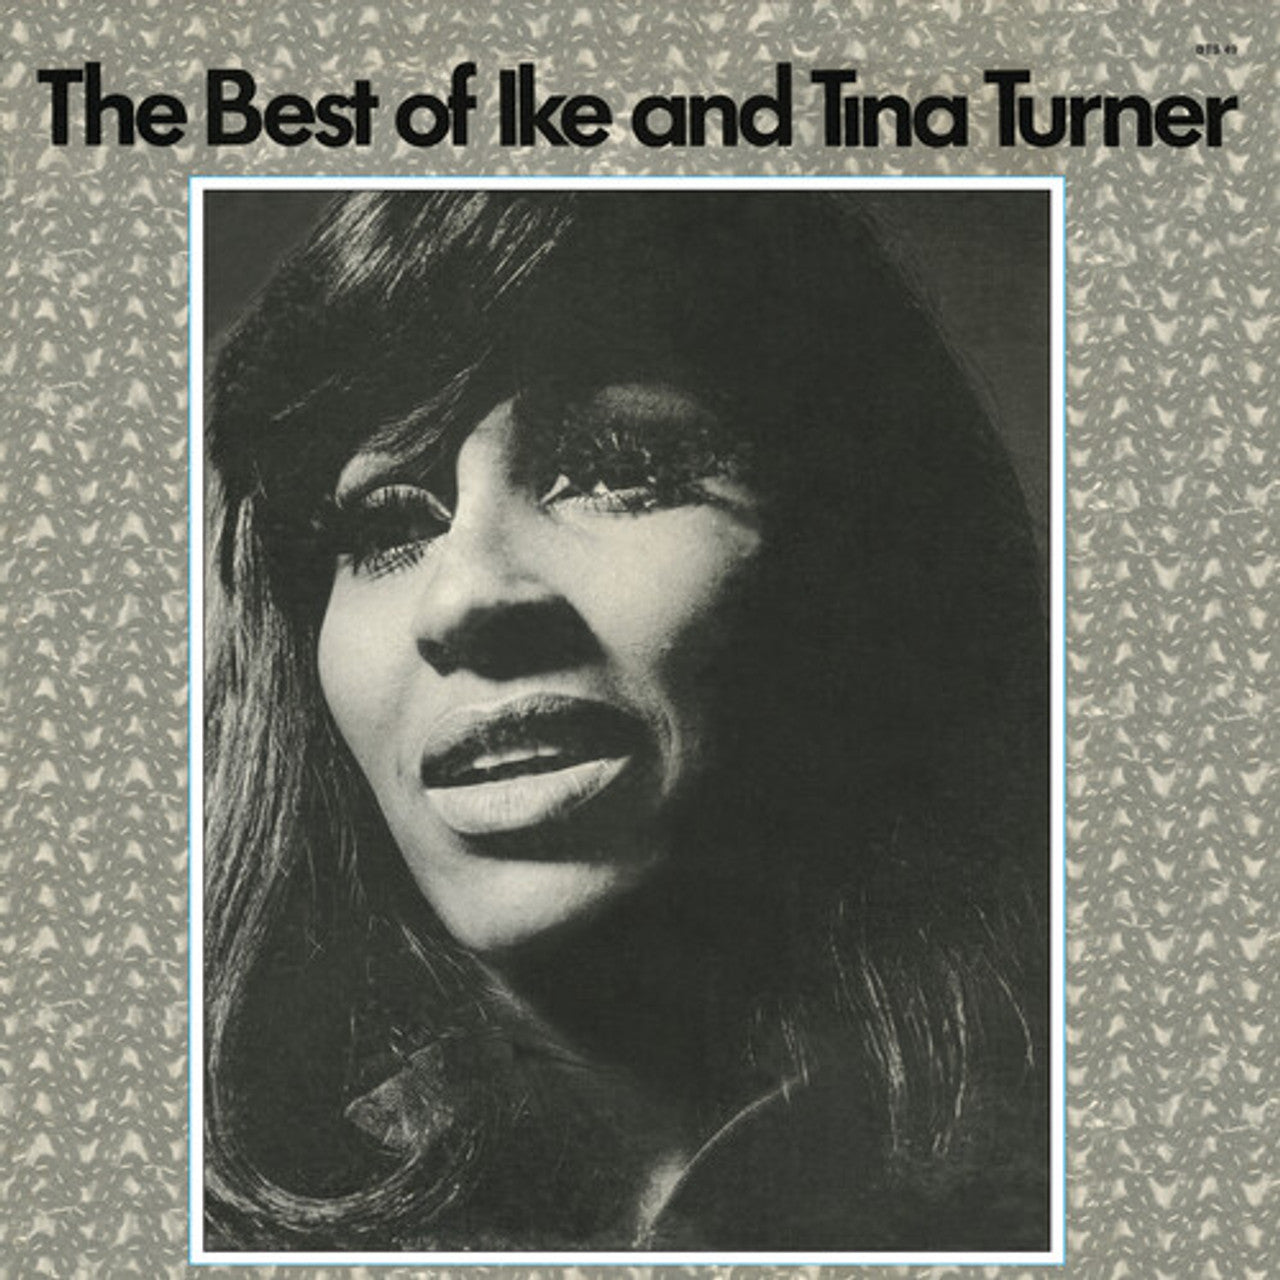 The Best of Ike and Tina Turner